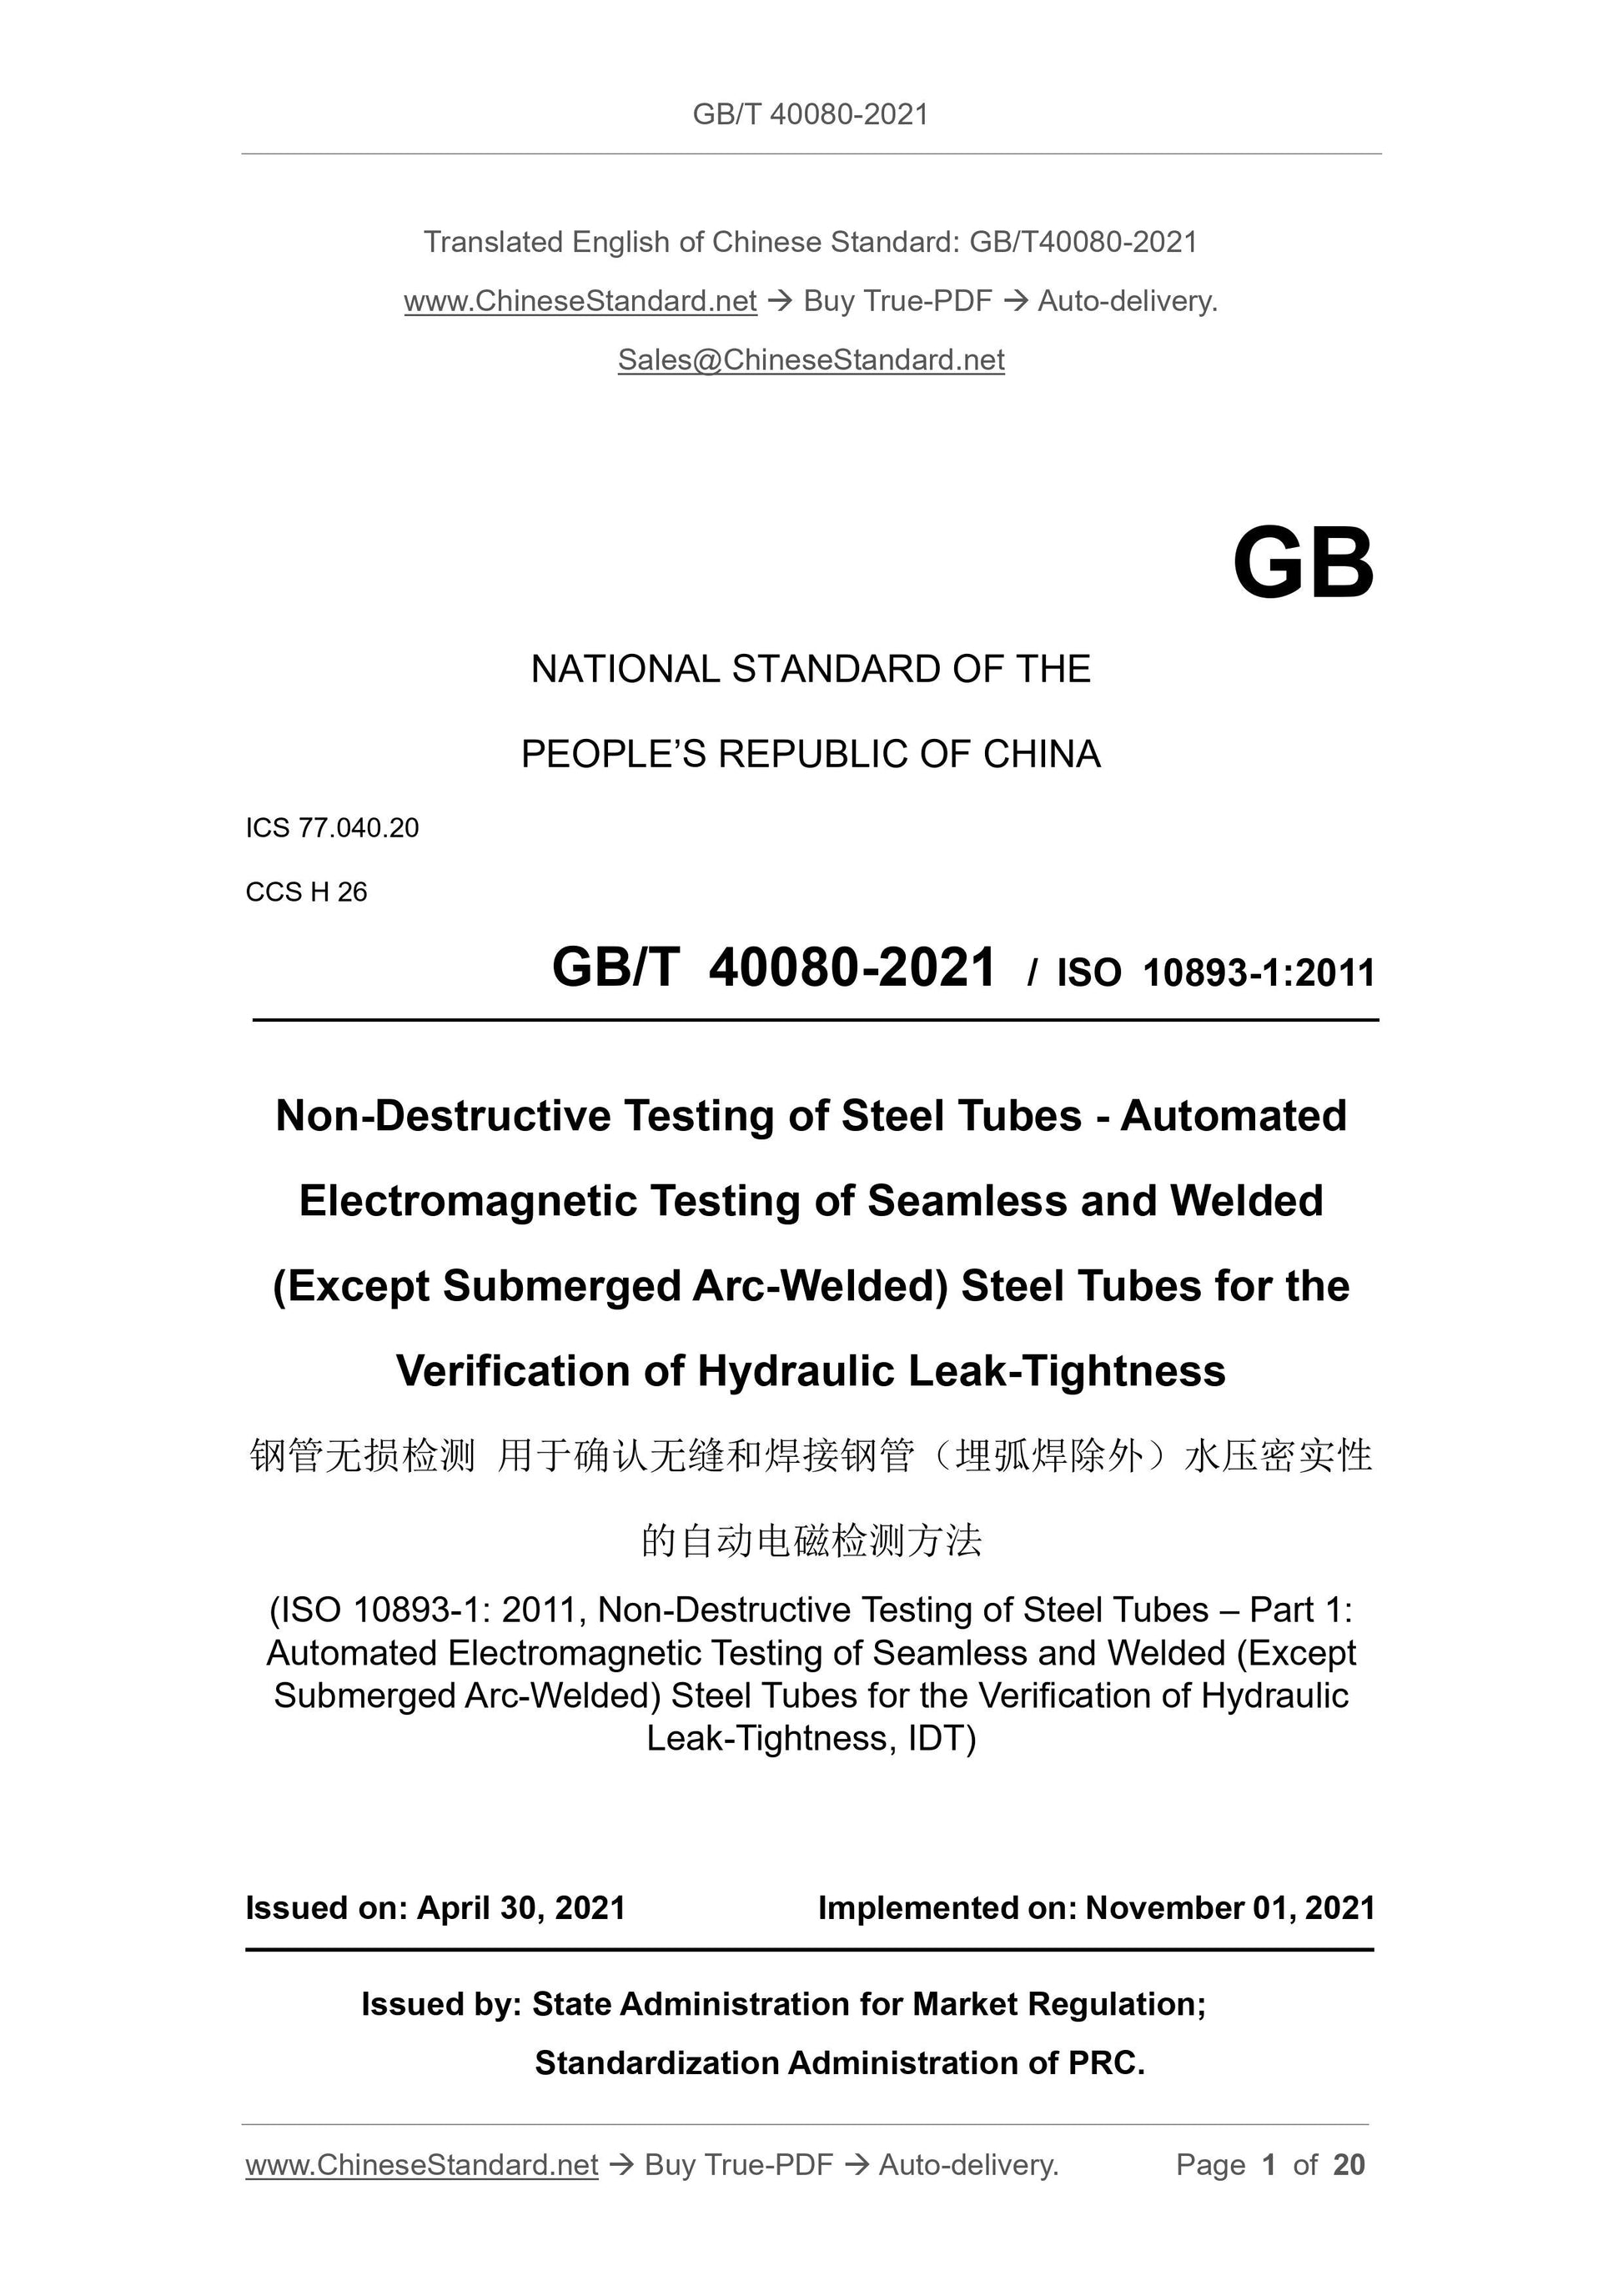 GB/T 40080-2021 Page 1